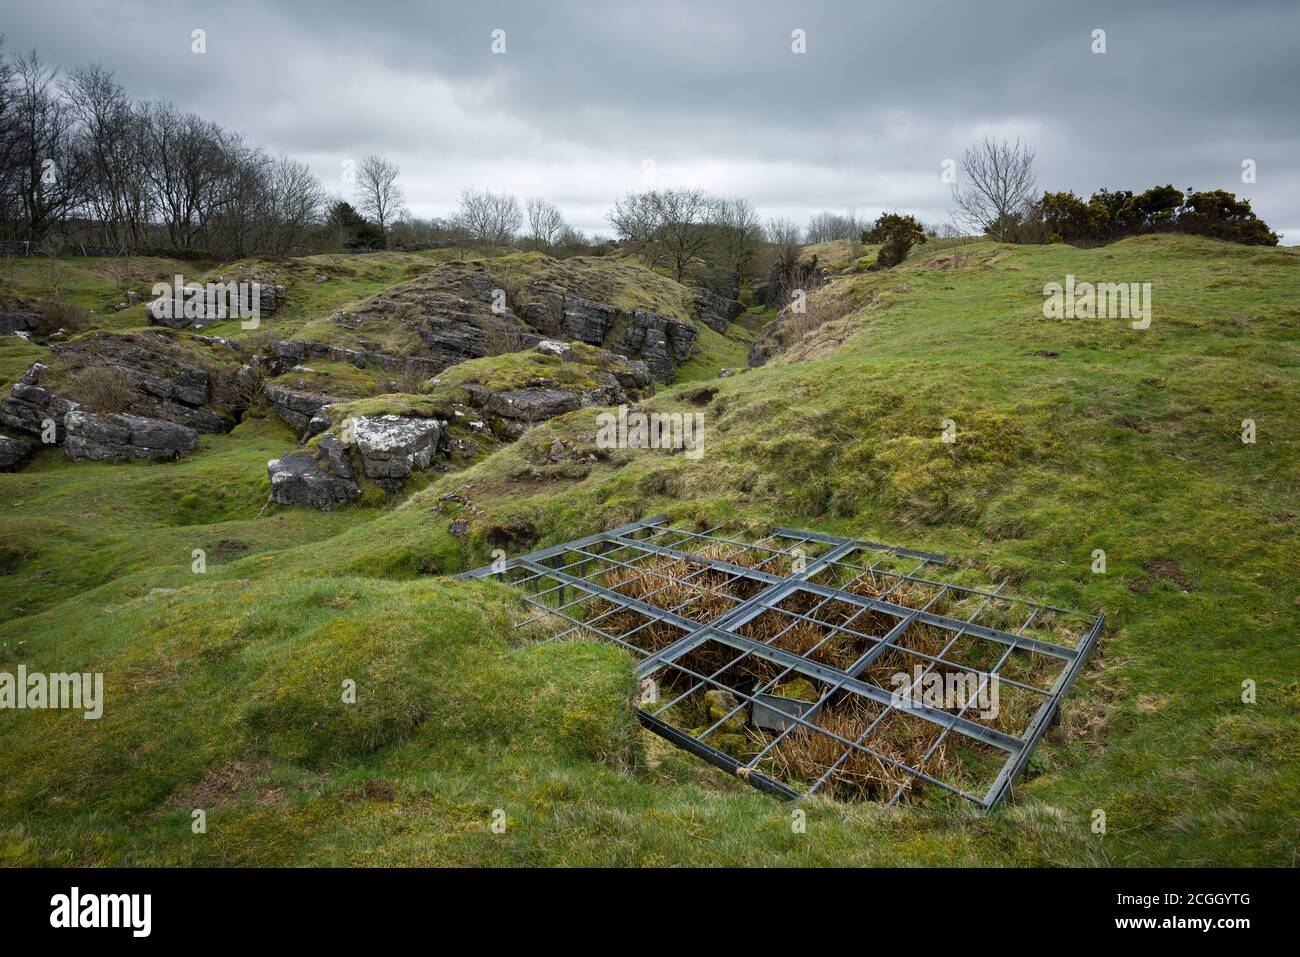 Grating over an exposed mineshaft at the old lead mines at Ubley Warren in the Mendip Hills, Somerset, England. Stock Photo